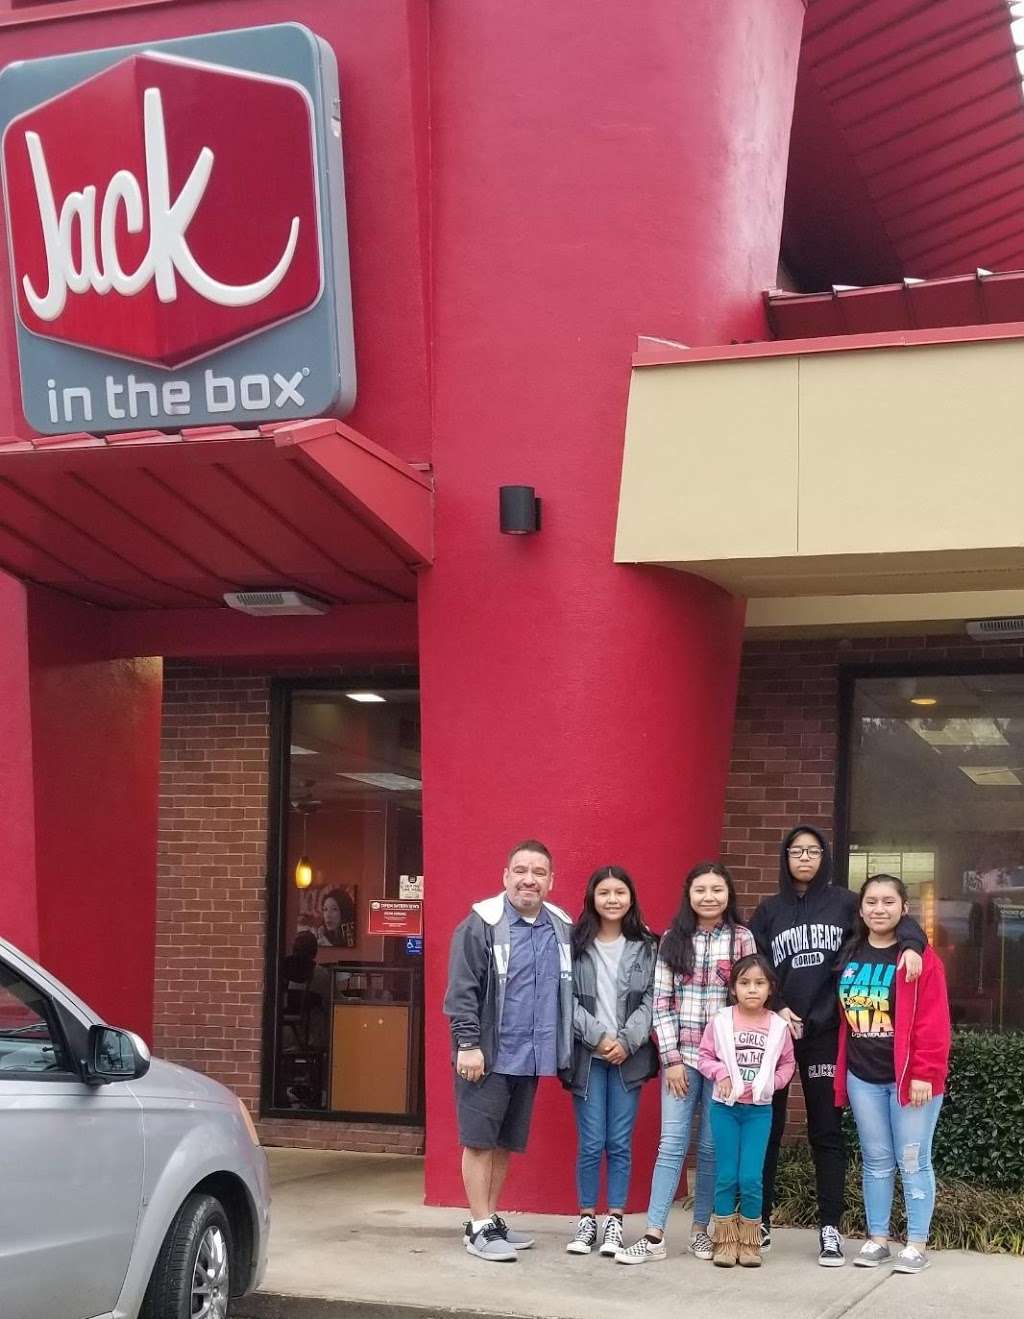 Jack in the Box | 895 Heckle Blvd, Rock Hill, SC 29730 | Phone: (803) 366-3255